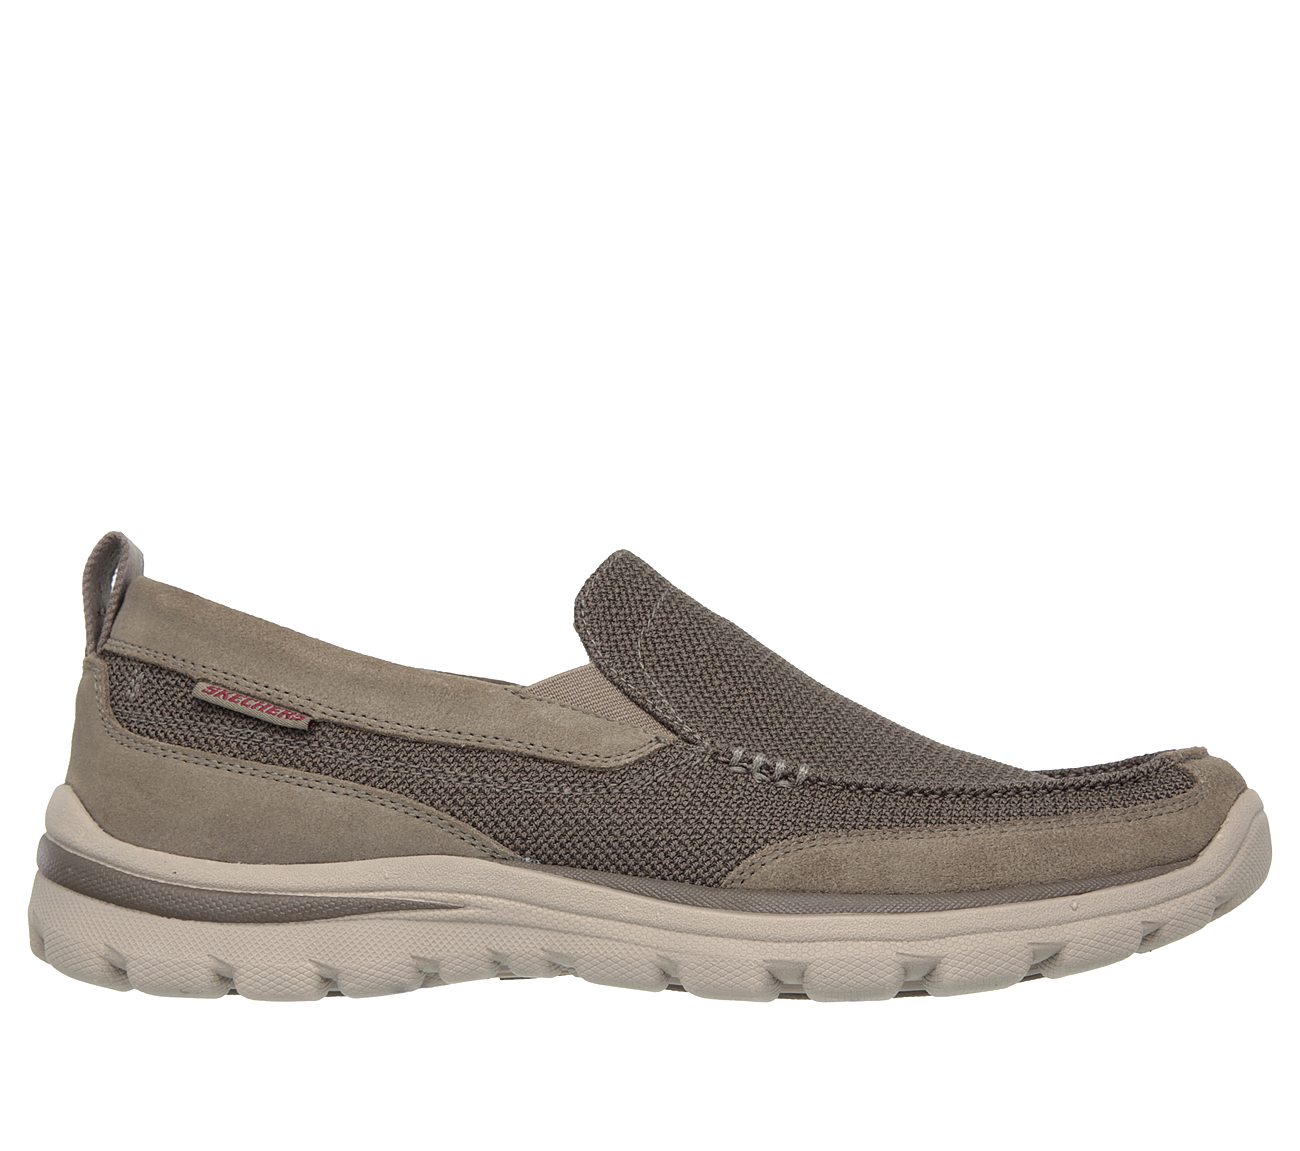 Buy SKECHERS Relaxed Fit: Superior - Milford Modern Comfort Shoes